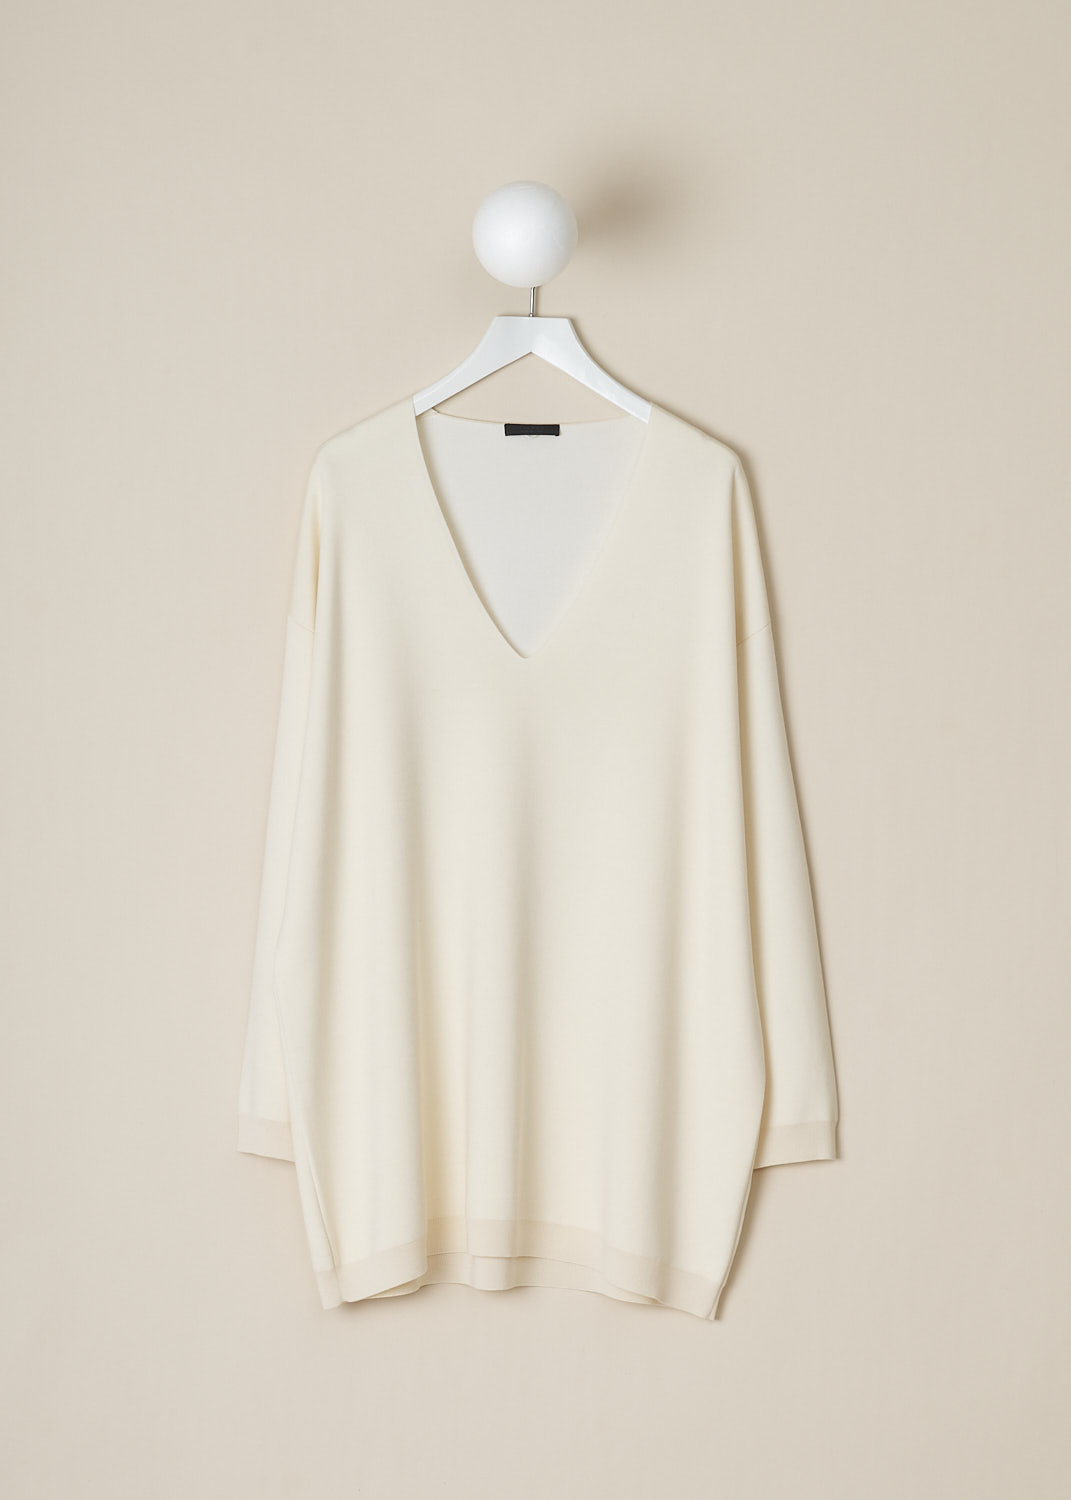 THE ROW, IVORY WHITE OVERSIZED MIRU TOP, MIRU_TOP_3227FI_BQ_IVORY, White, Front, This ivory white oversized Miru top has a deep V-neckline. The long sleeves have dropped shoulders and ribbed cuffs. The top has a straight, ribbed hemline. 
